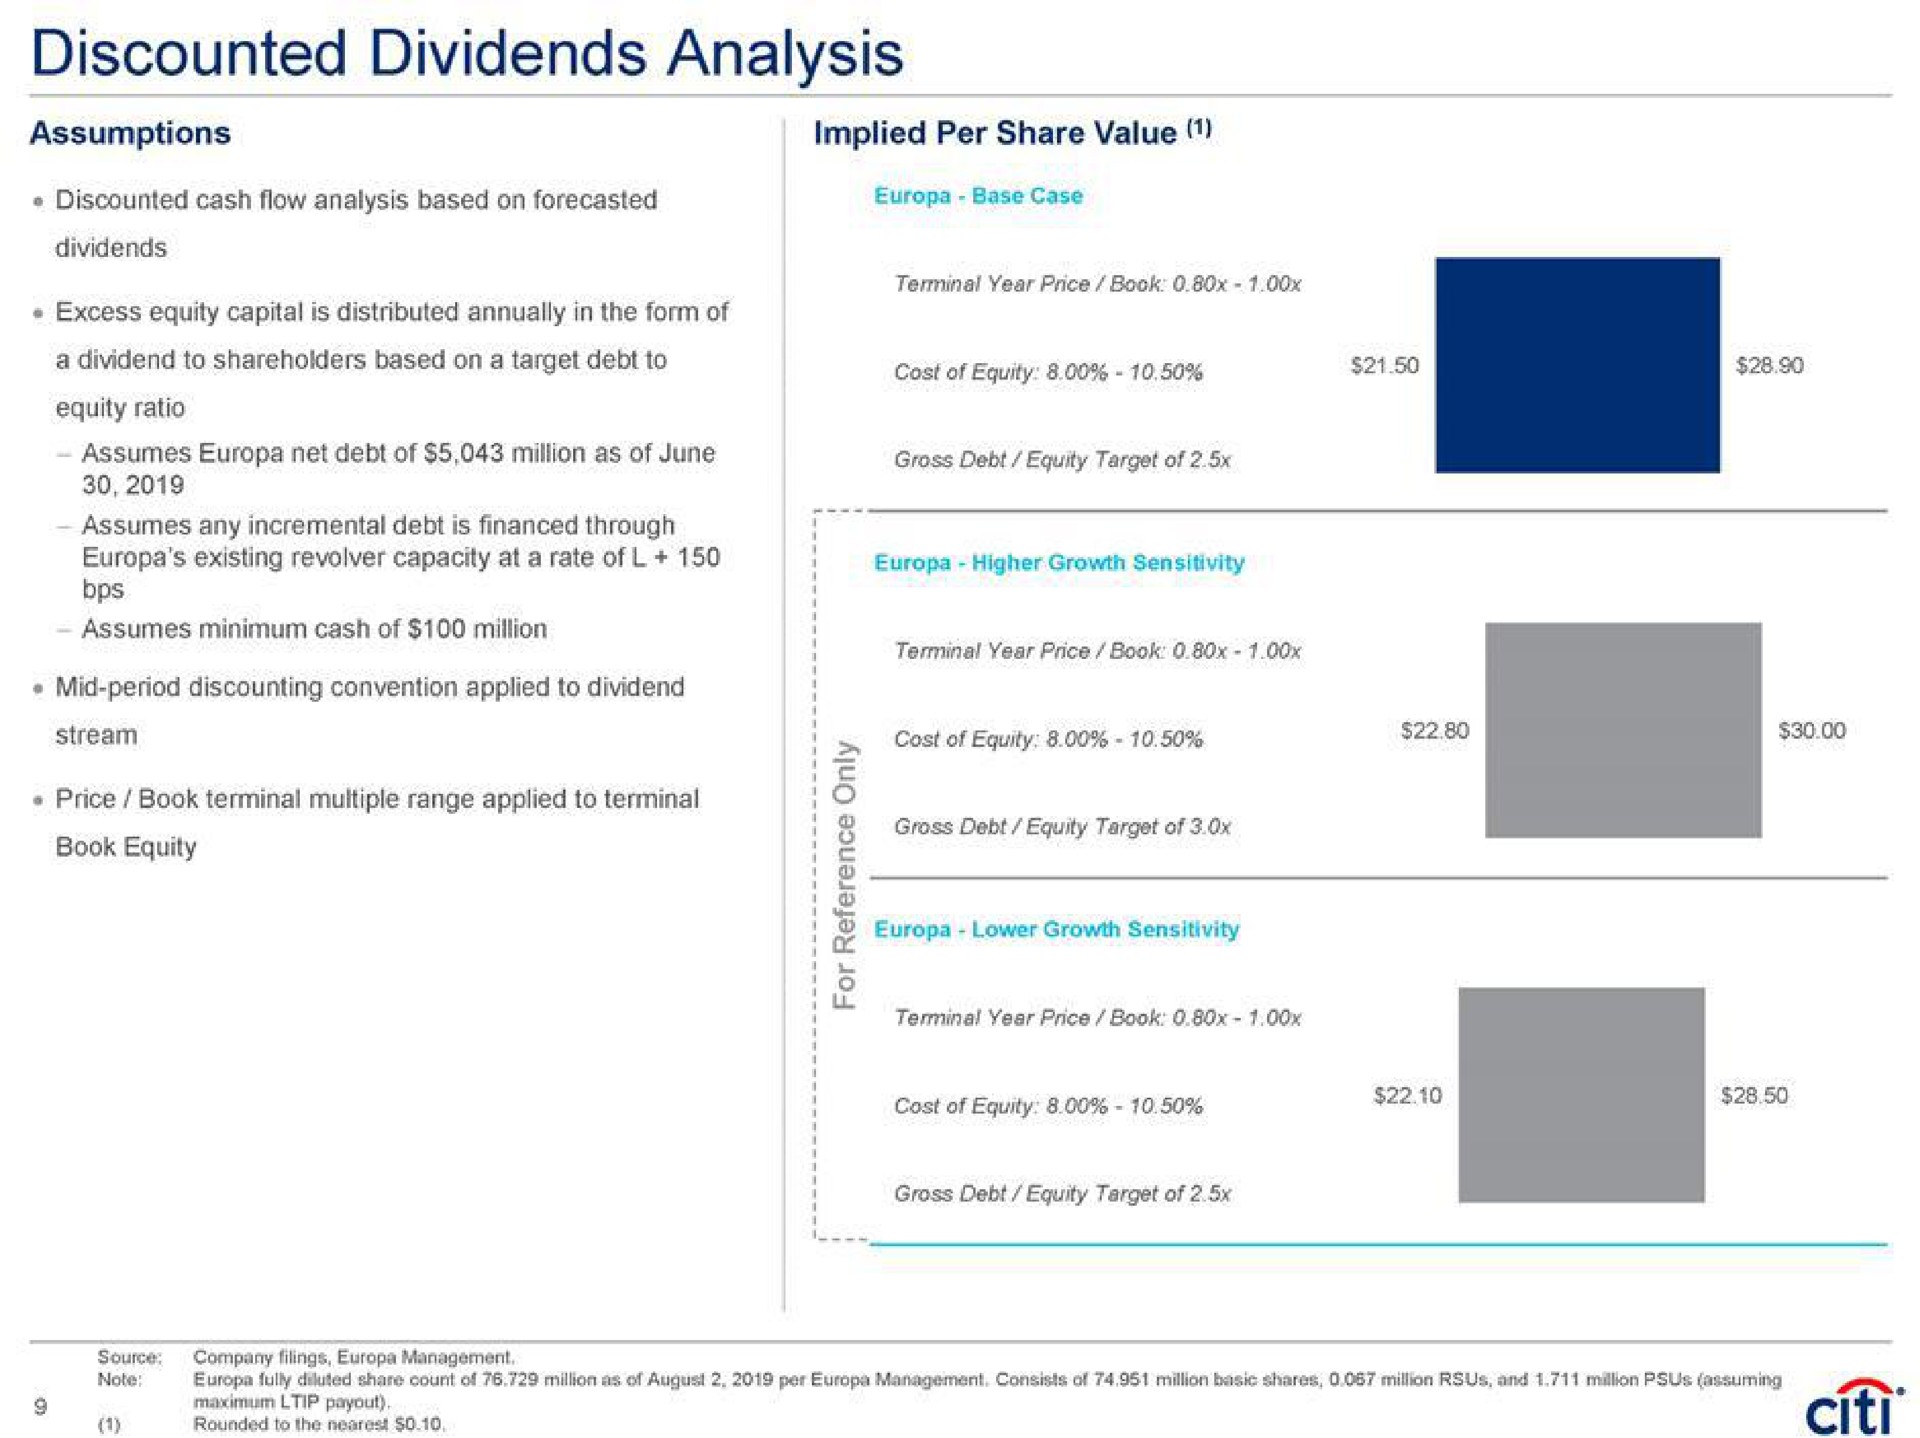 discounted dividends analysis assumptions implied per share value stream hie cost of equity | Citi